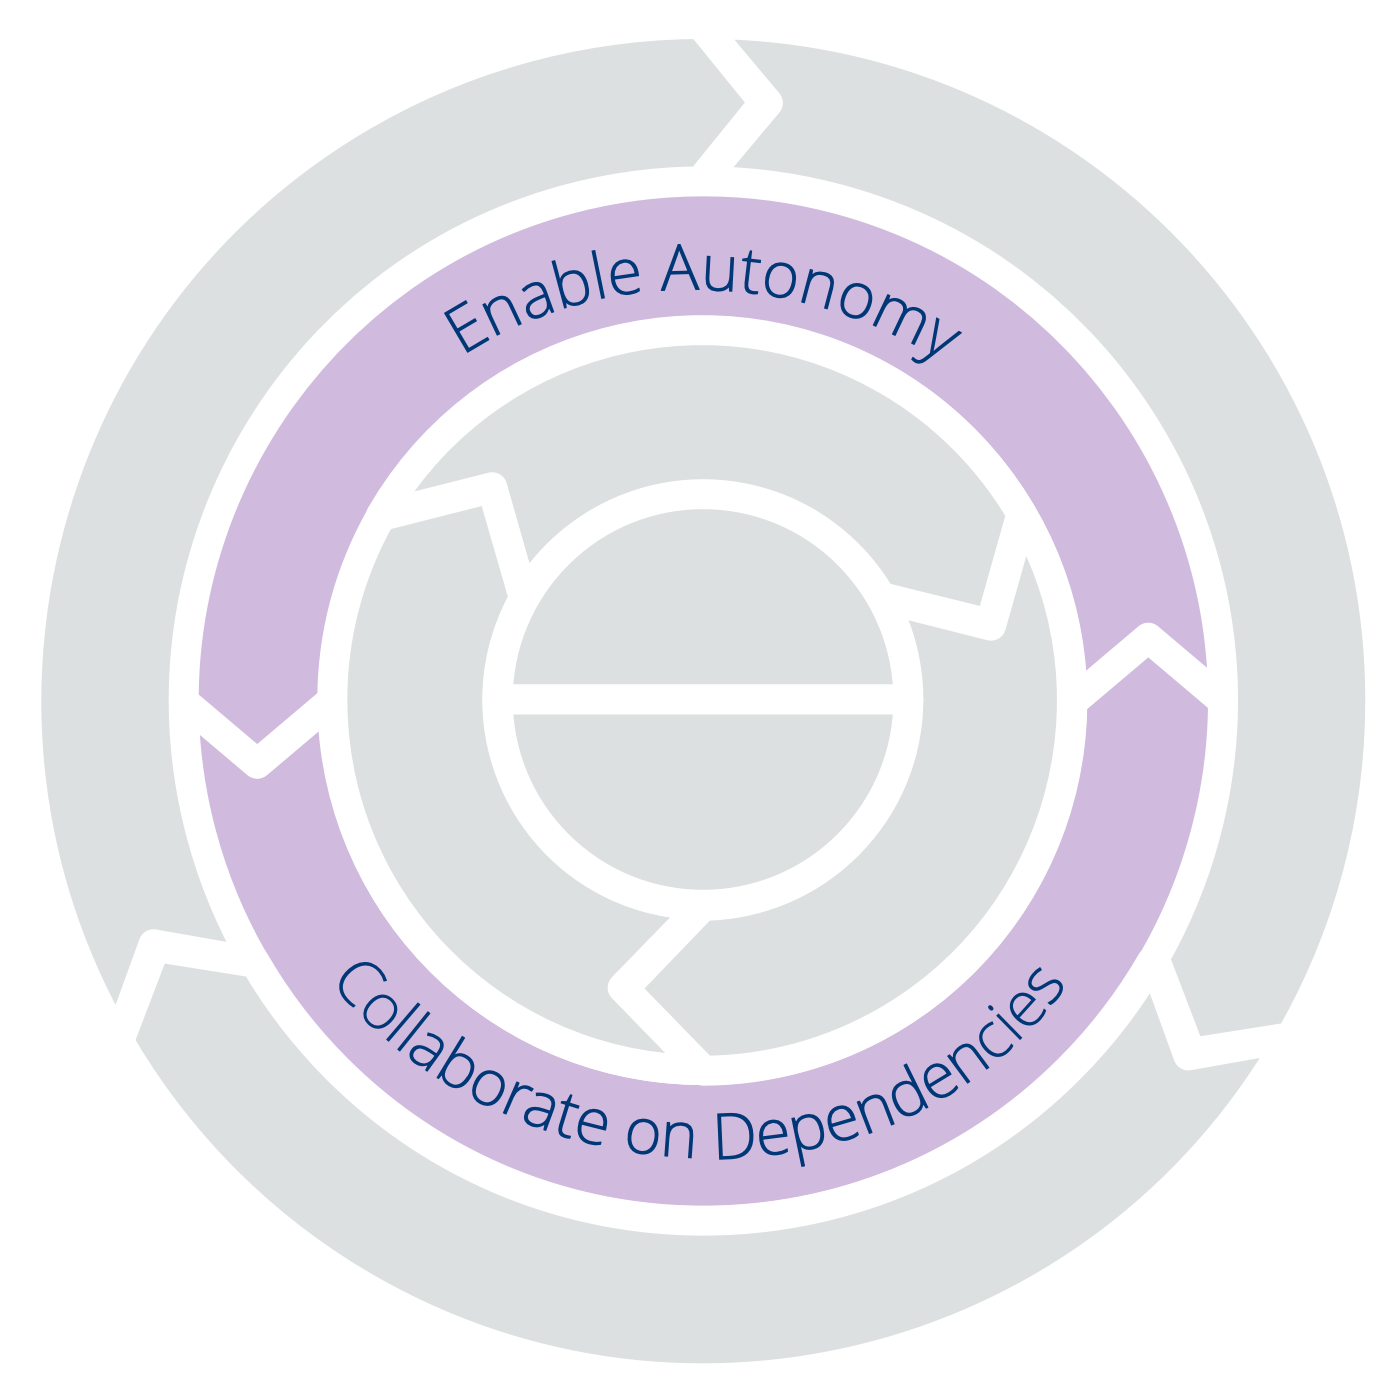 Two Principles for Structure: Enable Autonomy – Collaborate on Dependencies